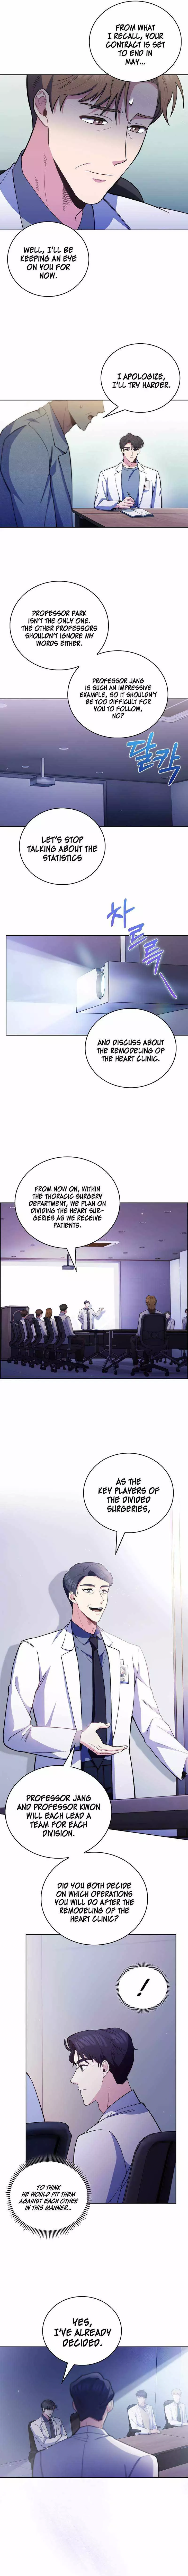 Level-Up Doctor (Manhwa) - 53 page 6-11315d8b